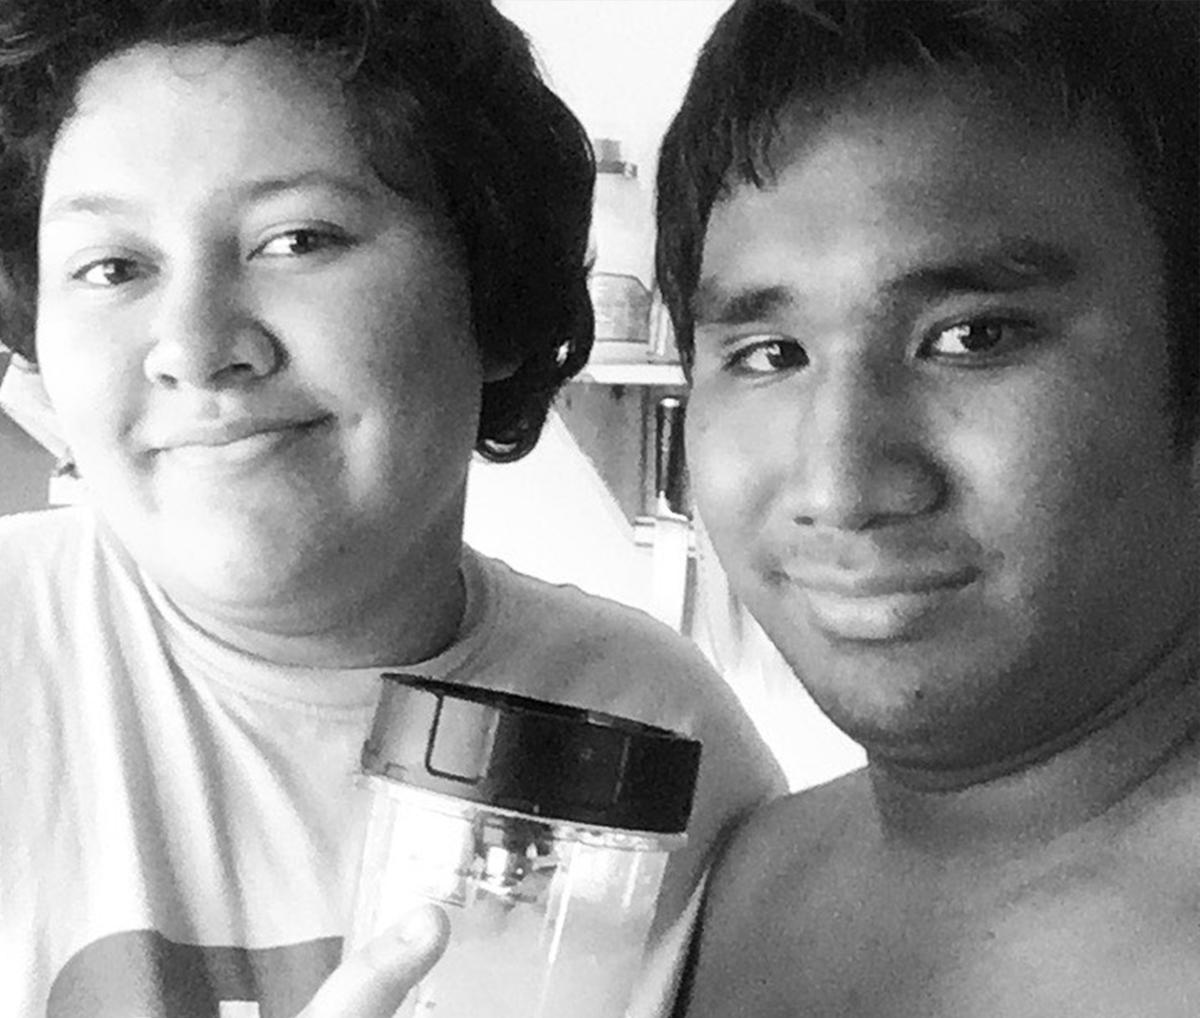 Aina Jose and his wife. (Courtesy of <a href="https://www.facebook.com/aina.townsend">Aina Jose</a>)